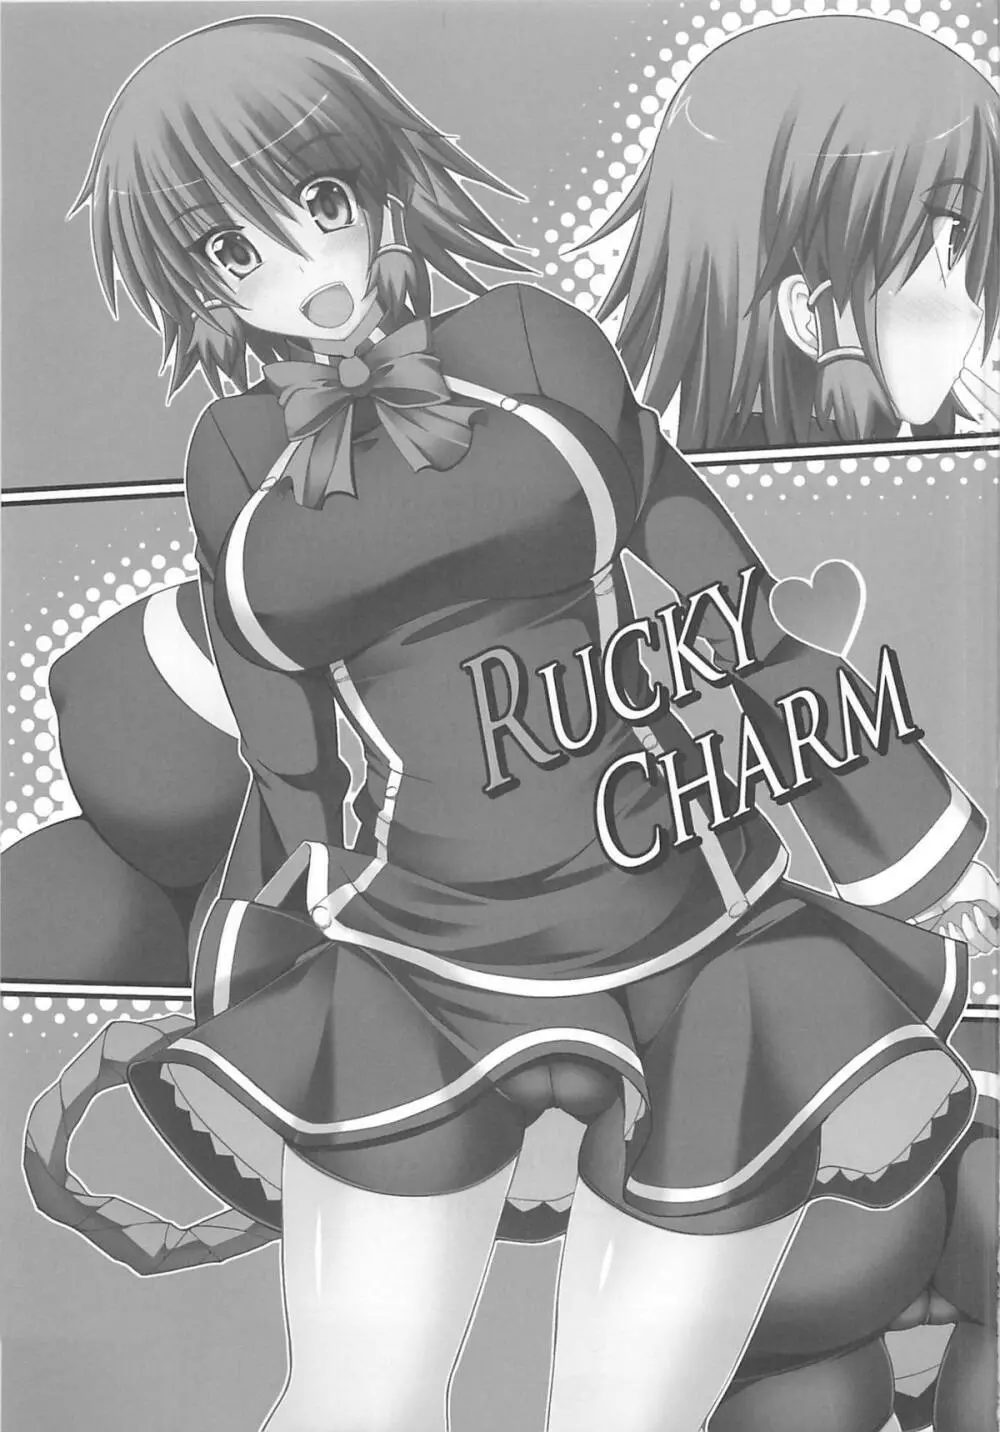 Rucky Charm - page2